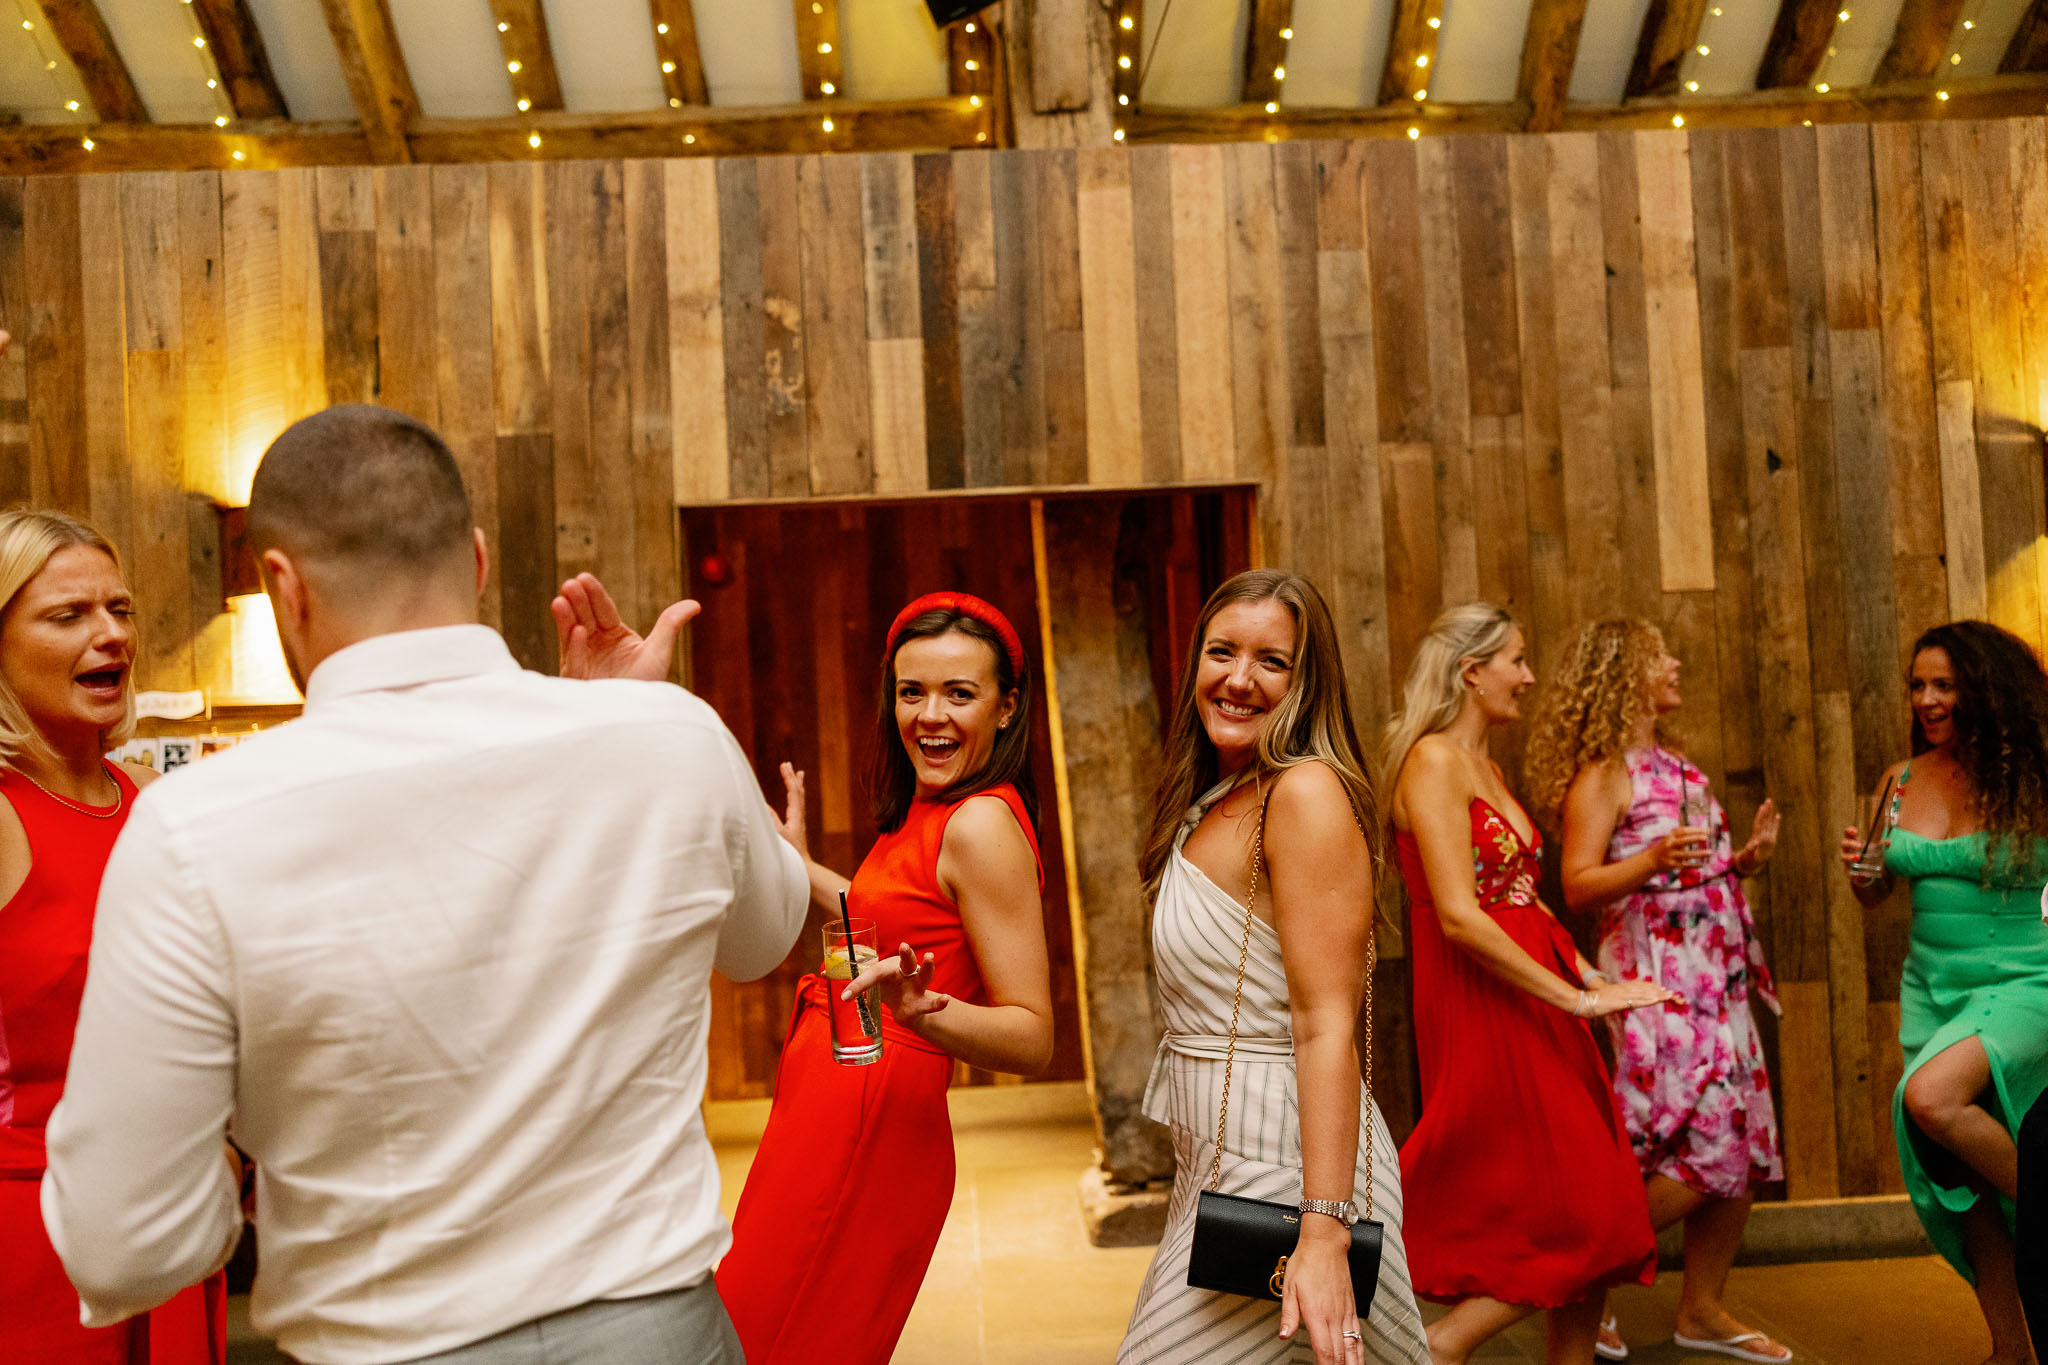 Fun Pictures of Wedding Dancing at Tithe Barn Cripps Wedding Venue